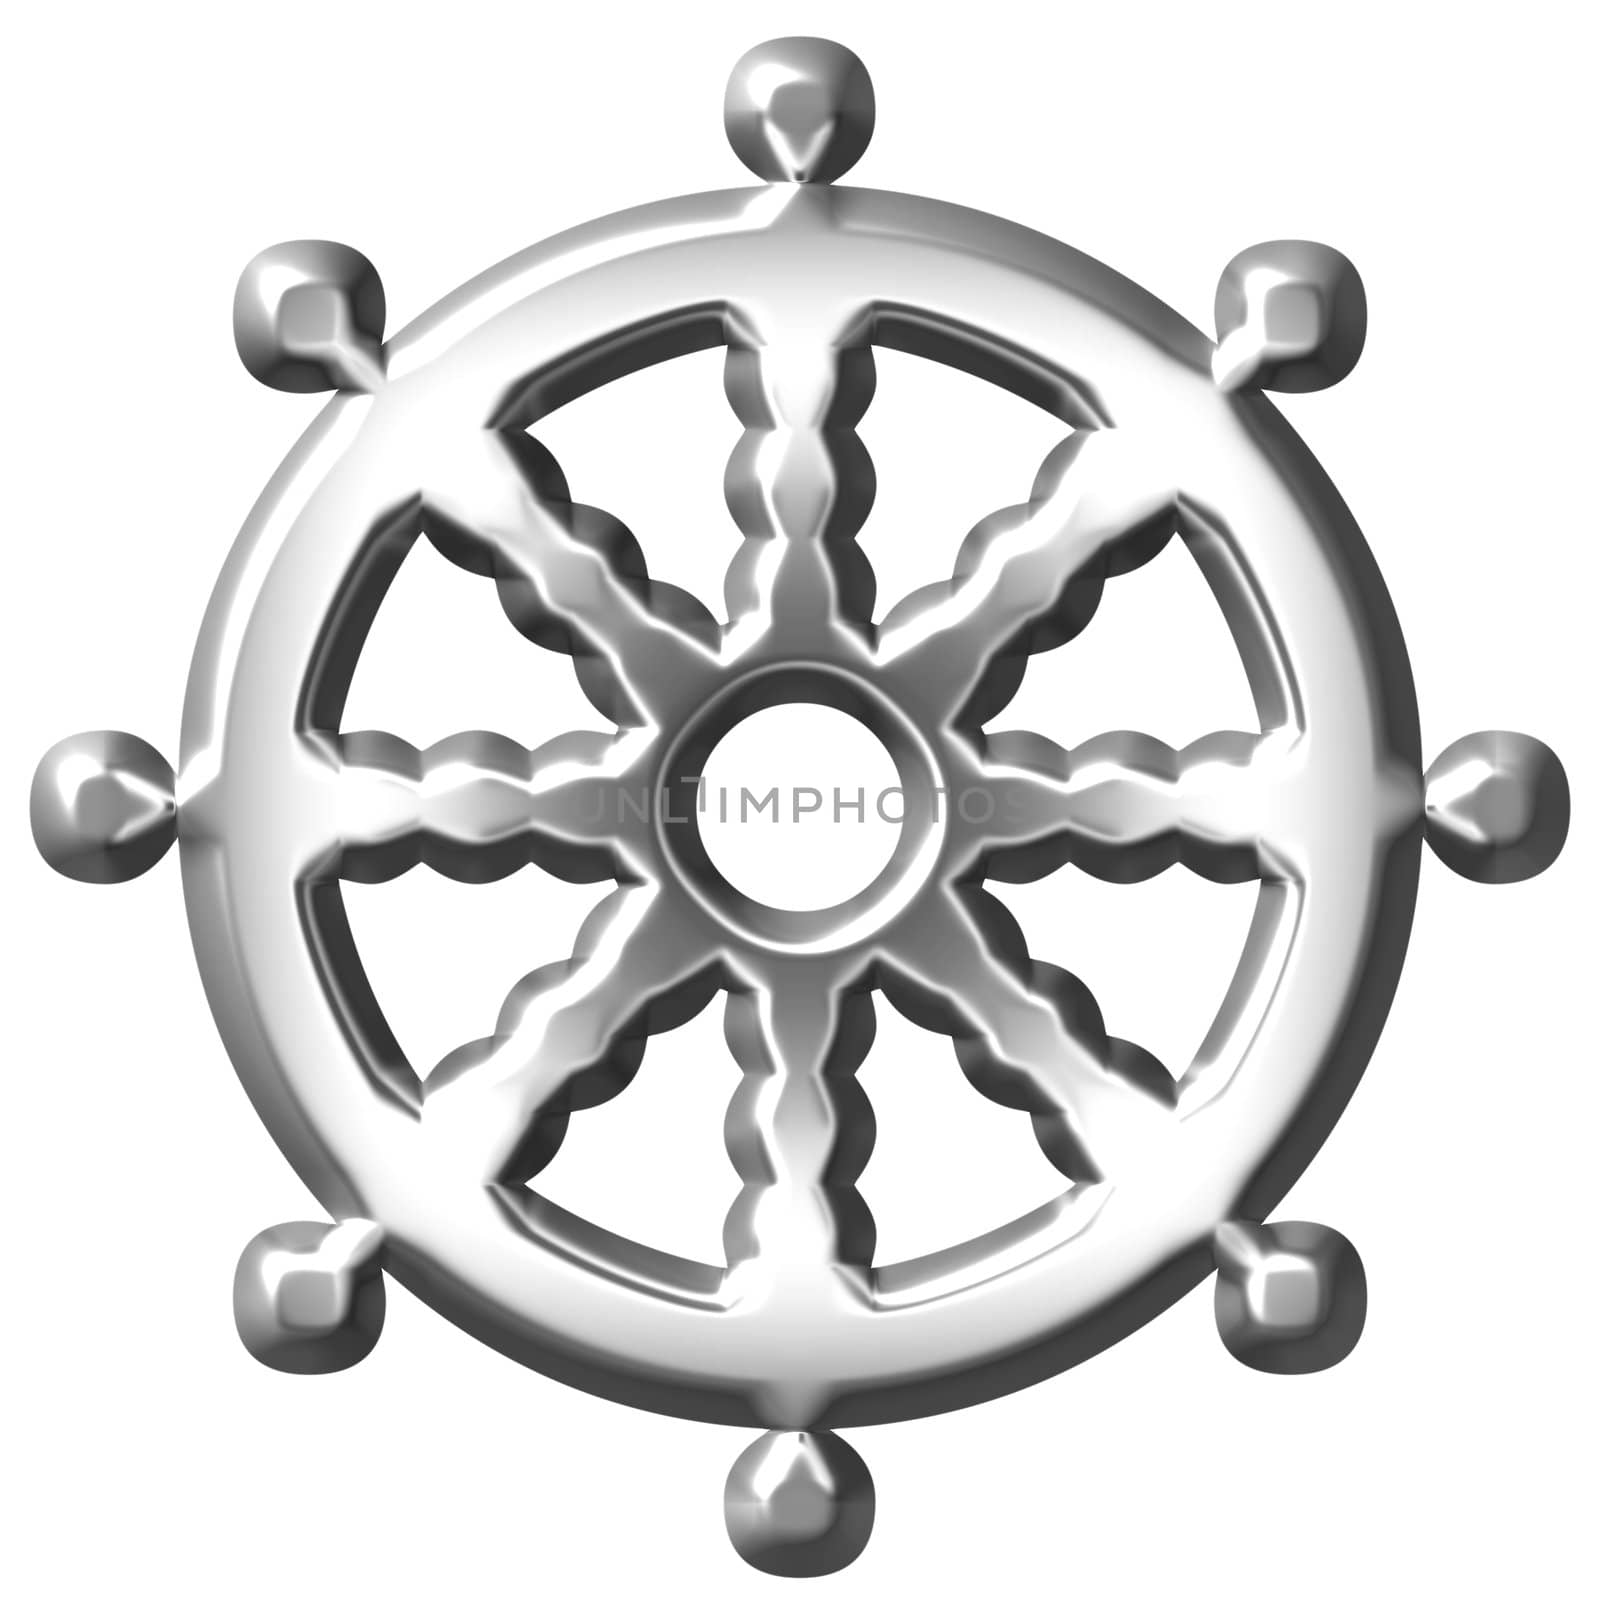 3d silver Buddhism symbol Wheel of Dharma isolated in white